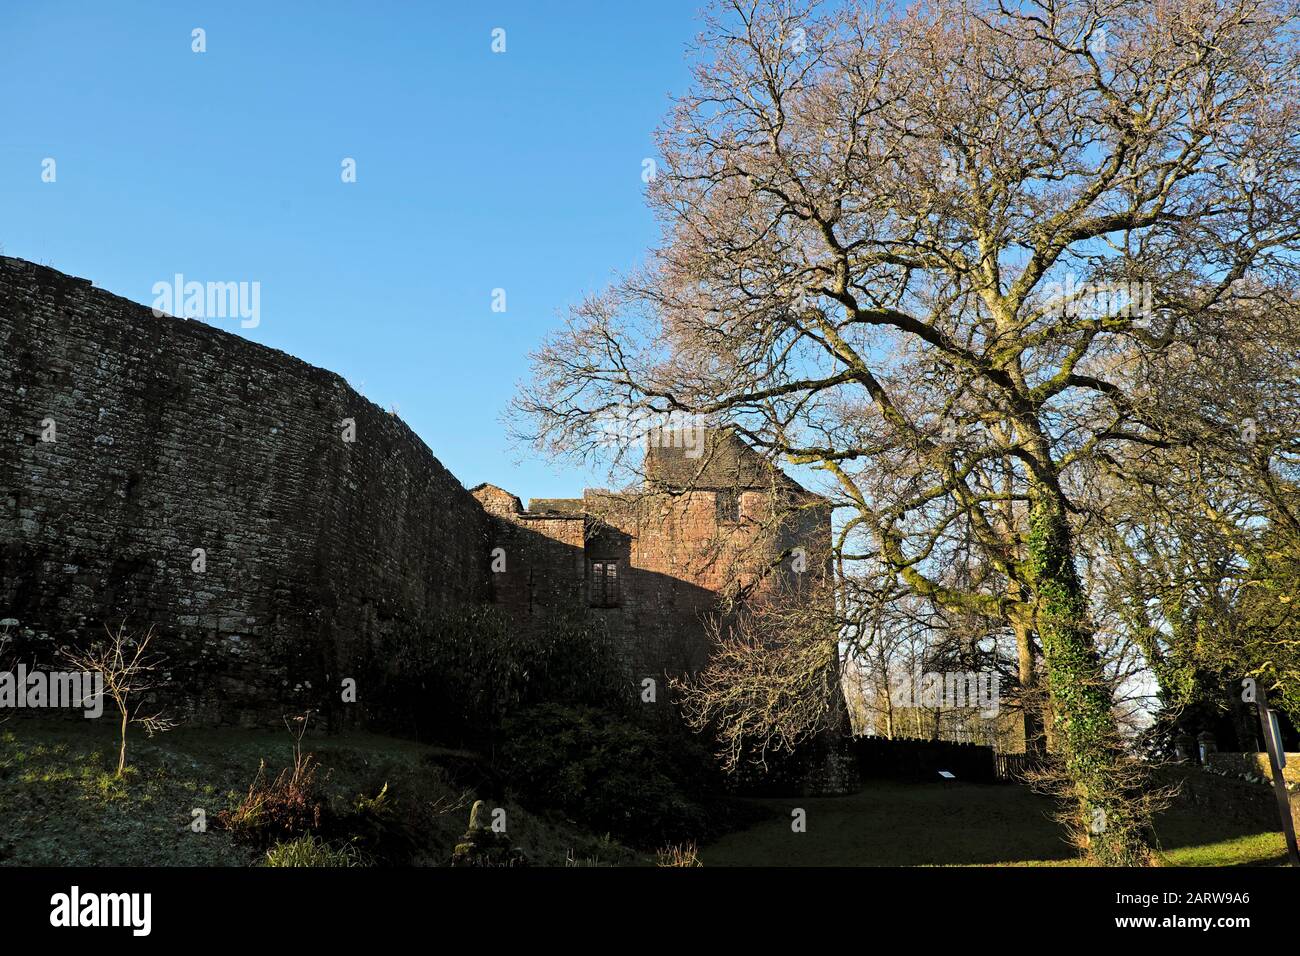 St Briavels Castle (12th Century) now a YHA hostel on the edge of the Forest of Dean near Lydney in Gloucestershire, England, UK  KATHY DEWITT Stock Photo